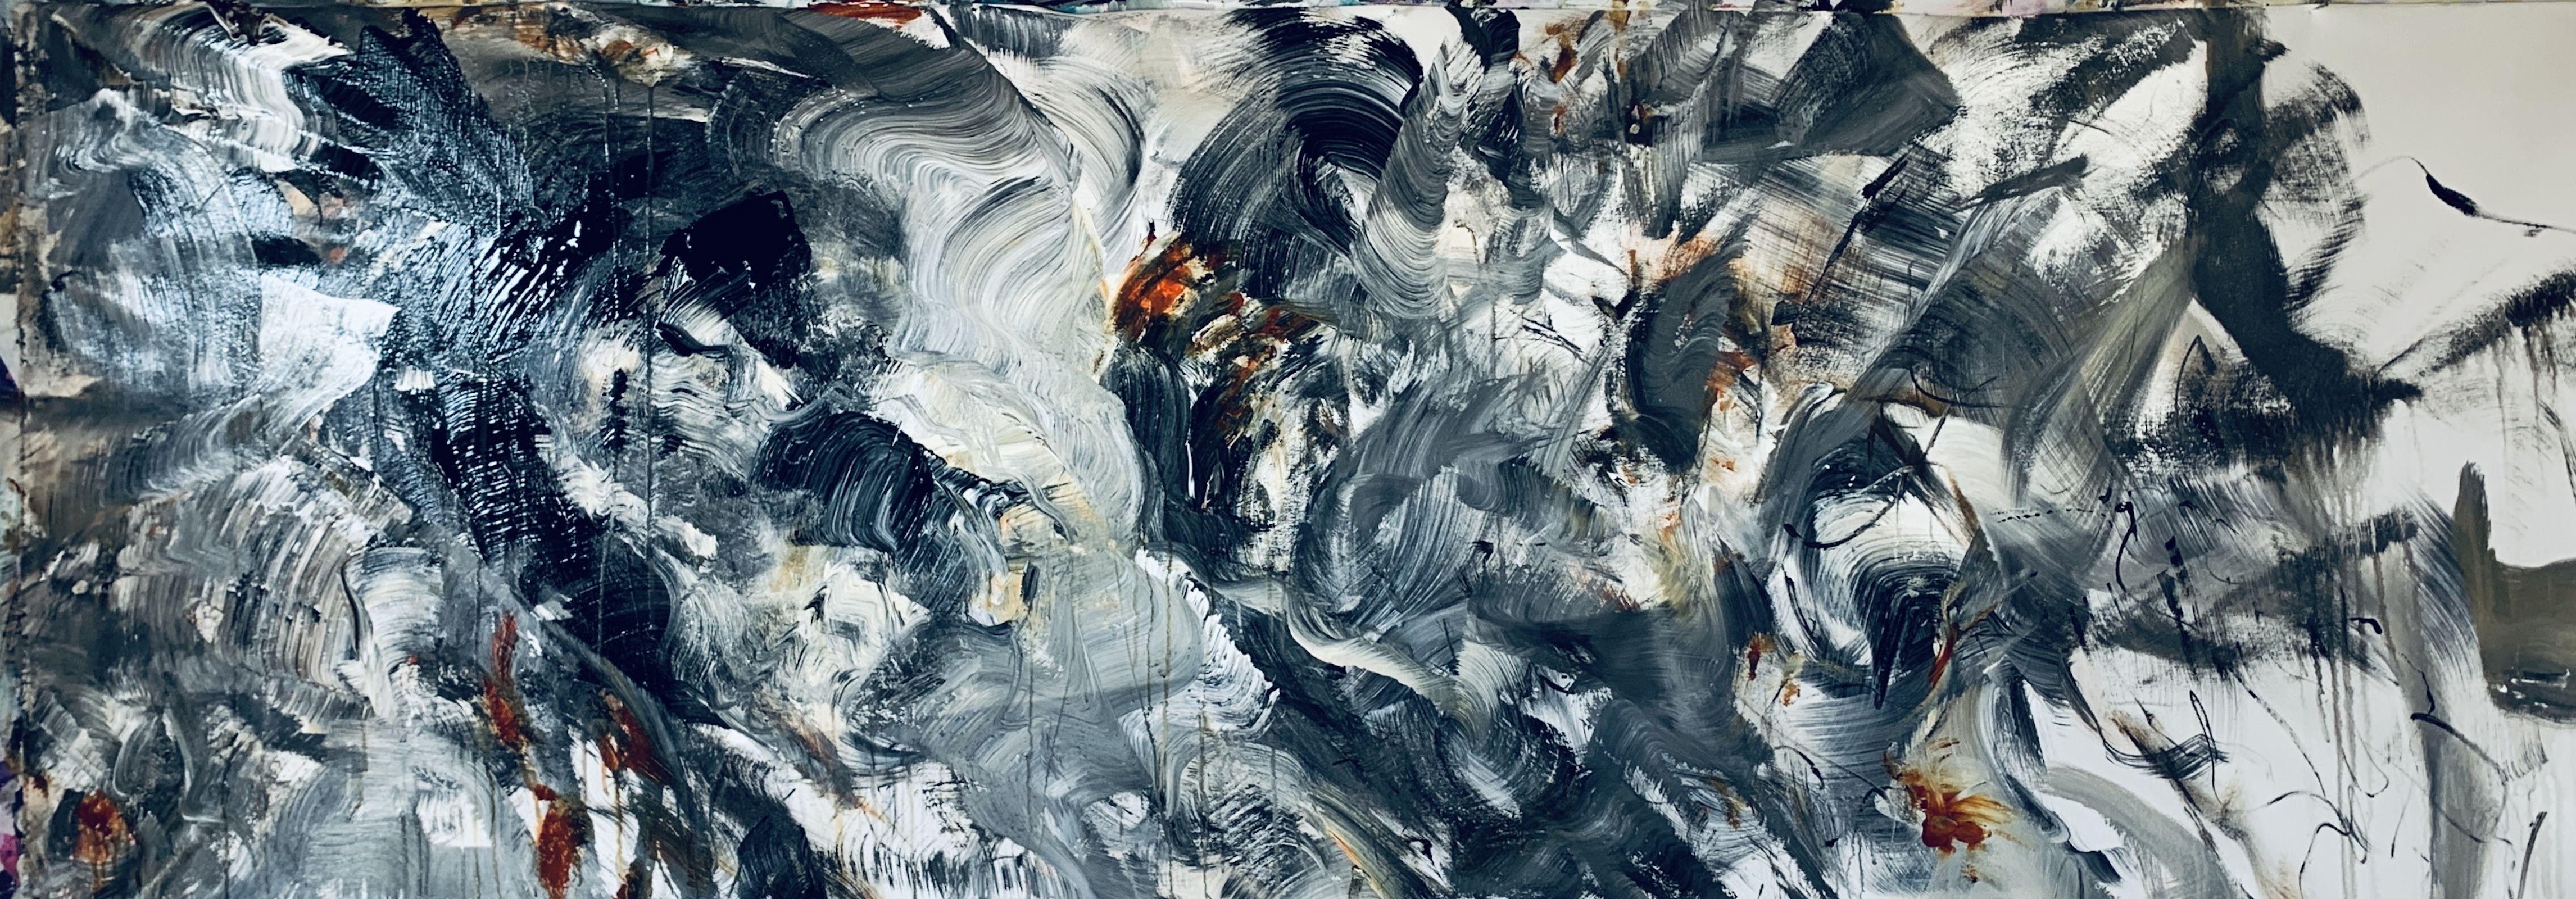 "Whispers"  As if the wind twists and turns there are sounds of nature heard in a calming natural setting. Expect the unexpected with the gestural swirls of warm neutrals in this large original. The artist has not signed on the front of the canvas